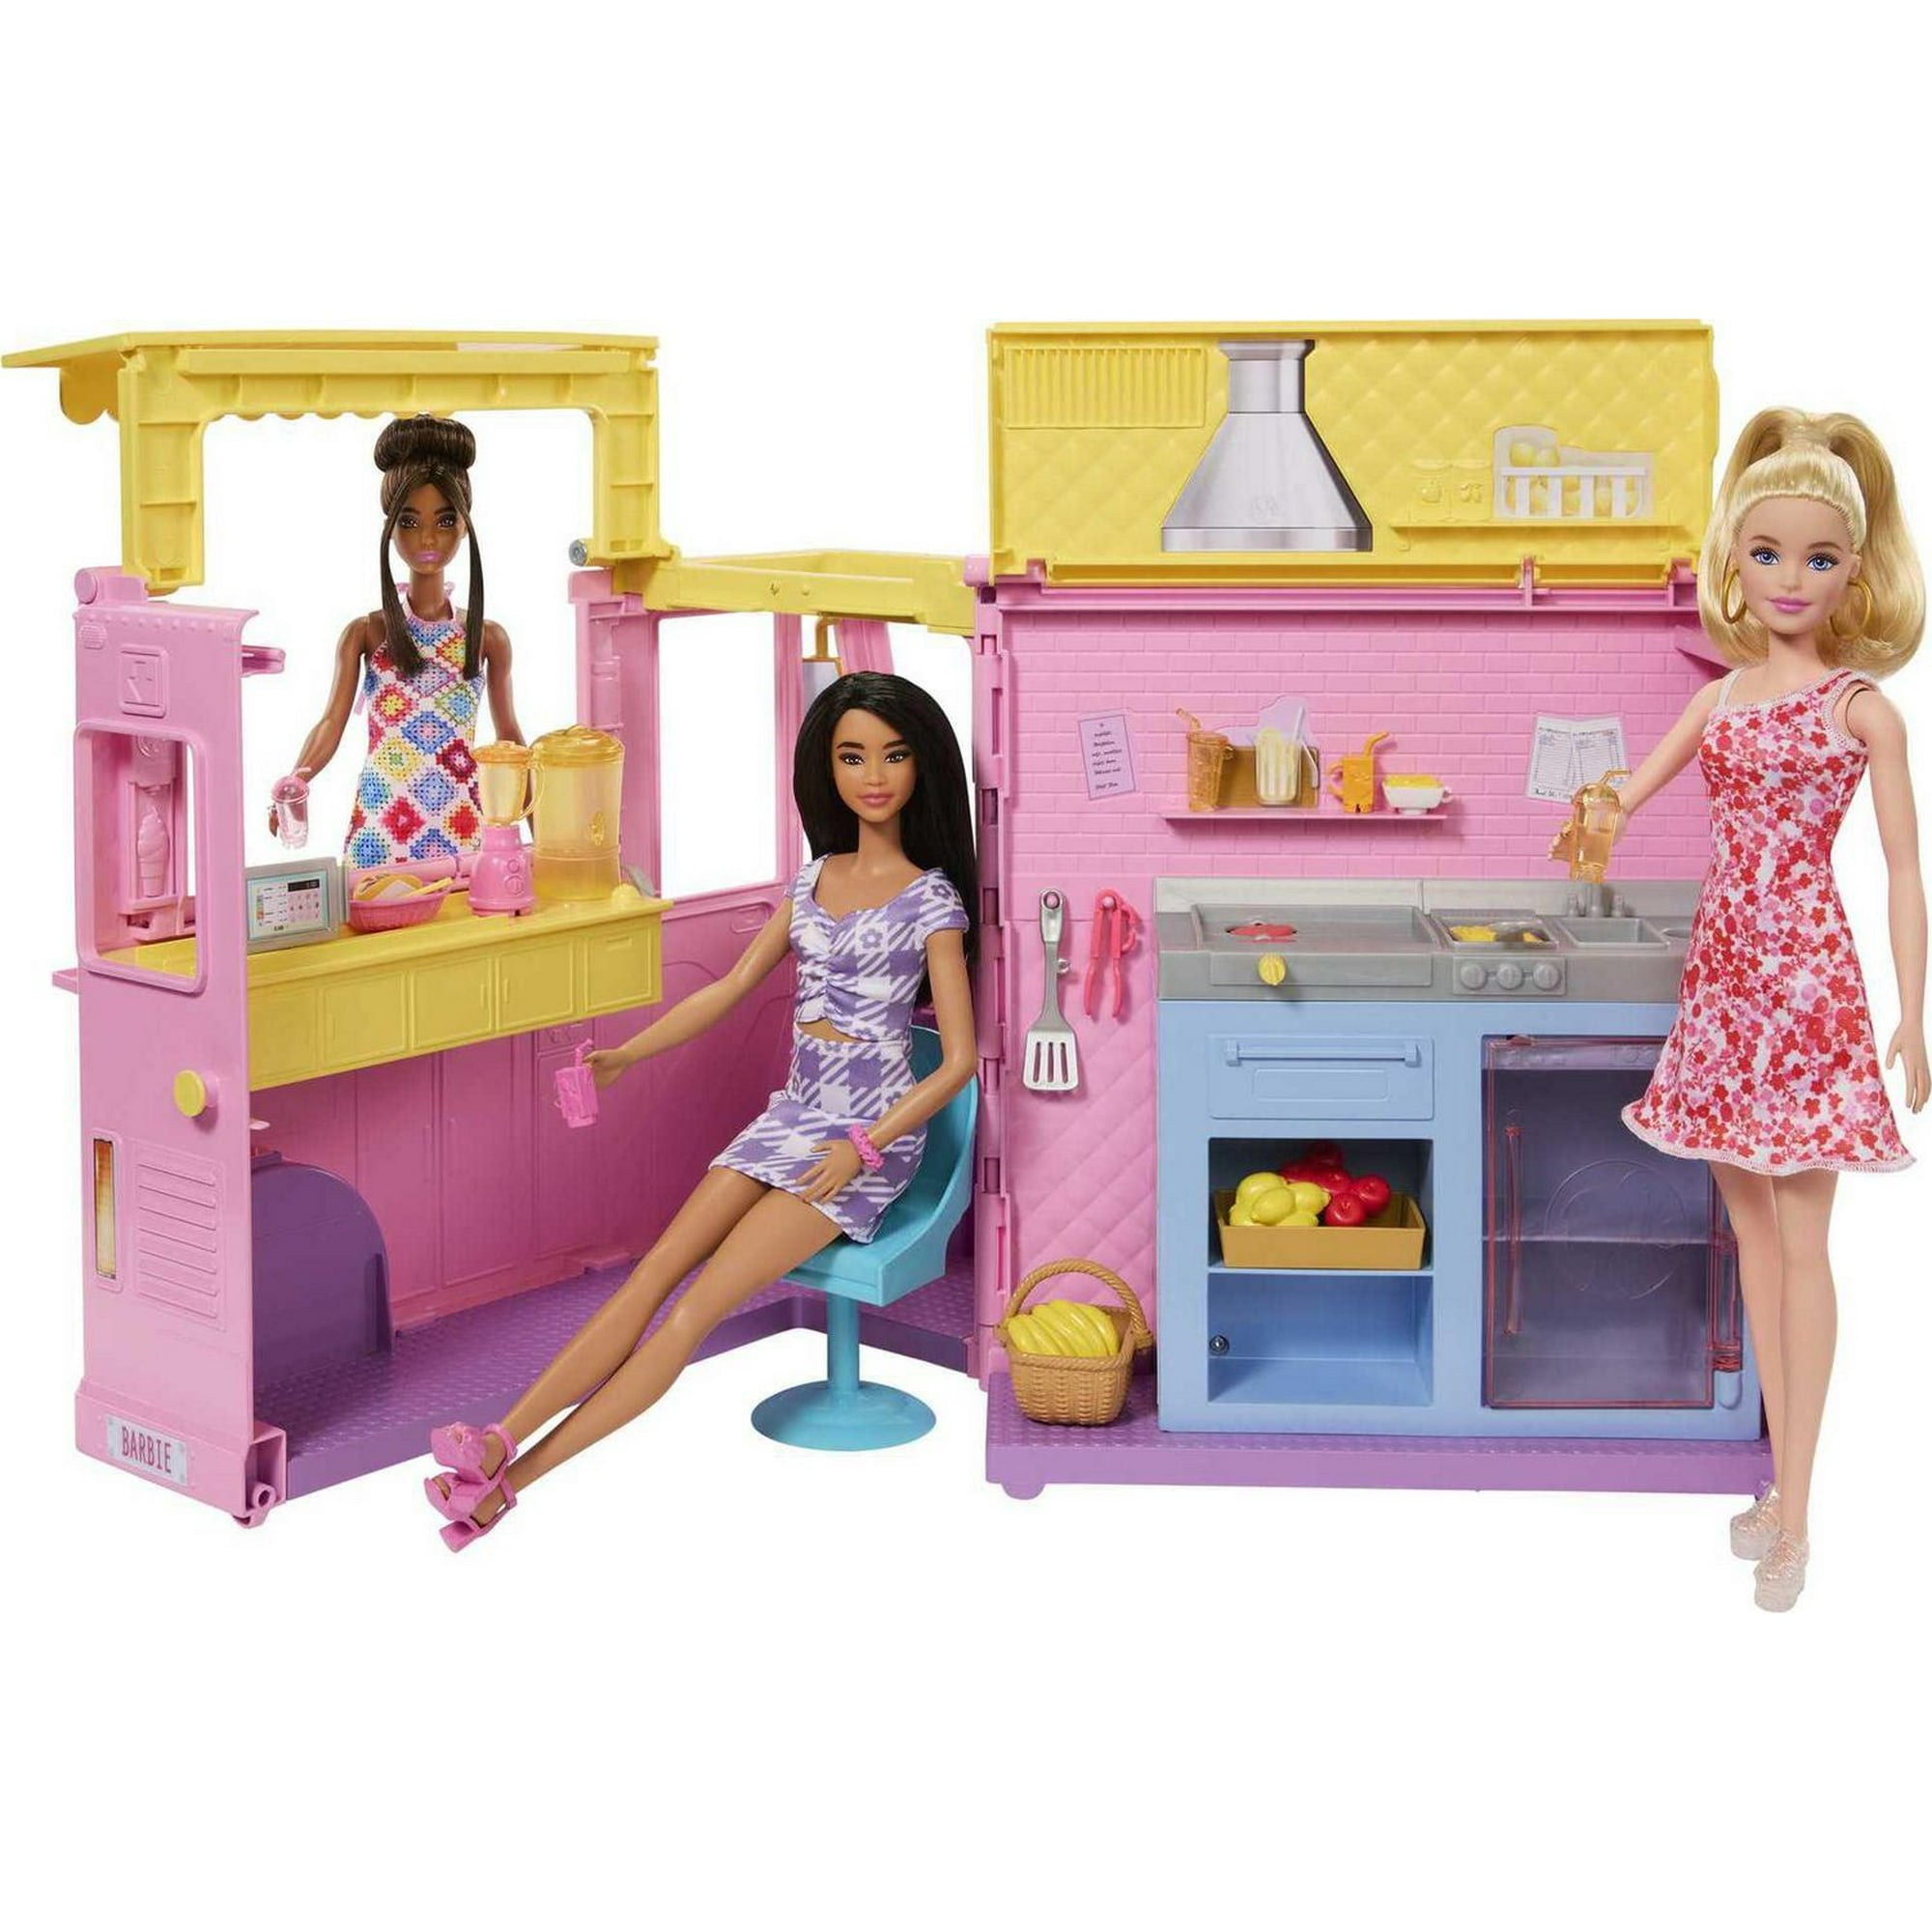 Barbie Beach Boardwalk Playset, 2 Dolls & 20+ Accessories Including Snack  Stand, Ice Cream Kiosk, Puppy & Themed Pieces